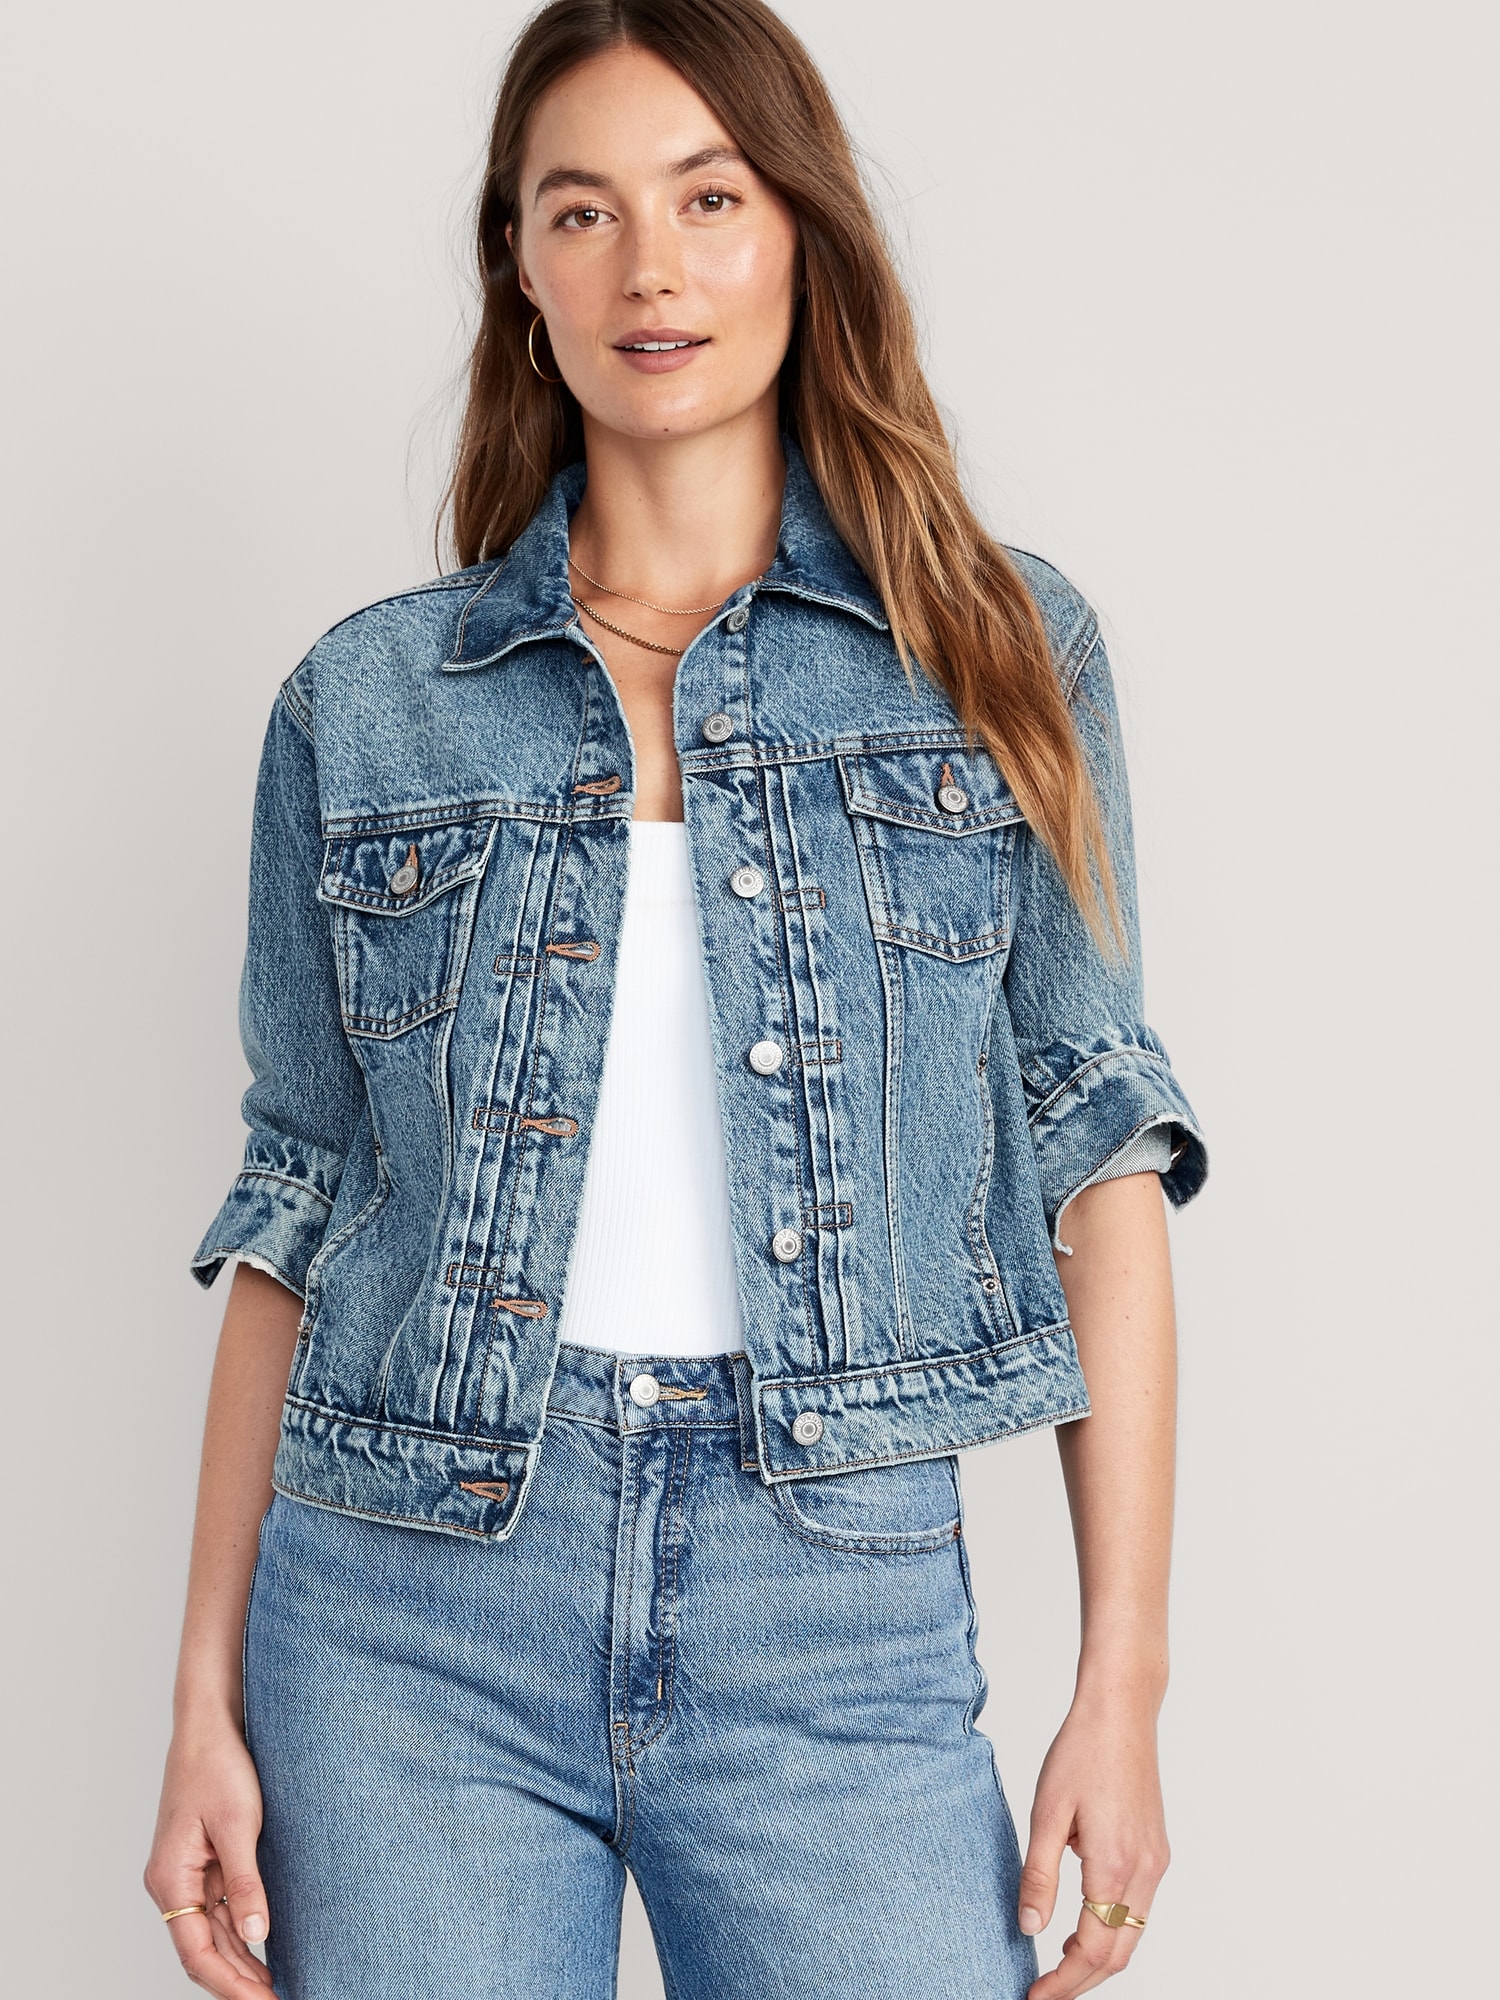 J.Crew: Classic Denim Jacket In Brilliant Day Wash For Women-cacanhphuclong.com.vn